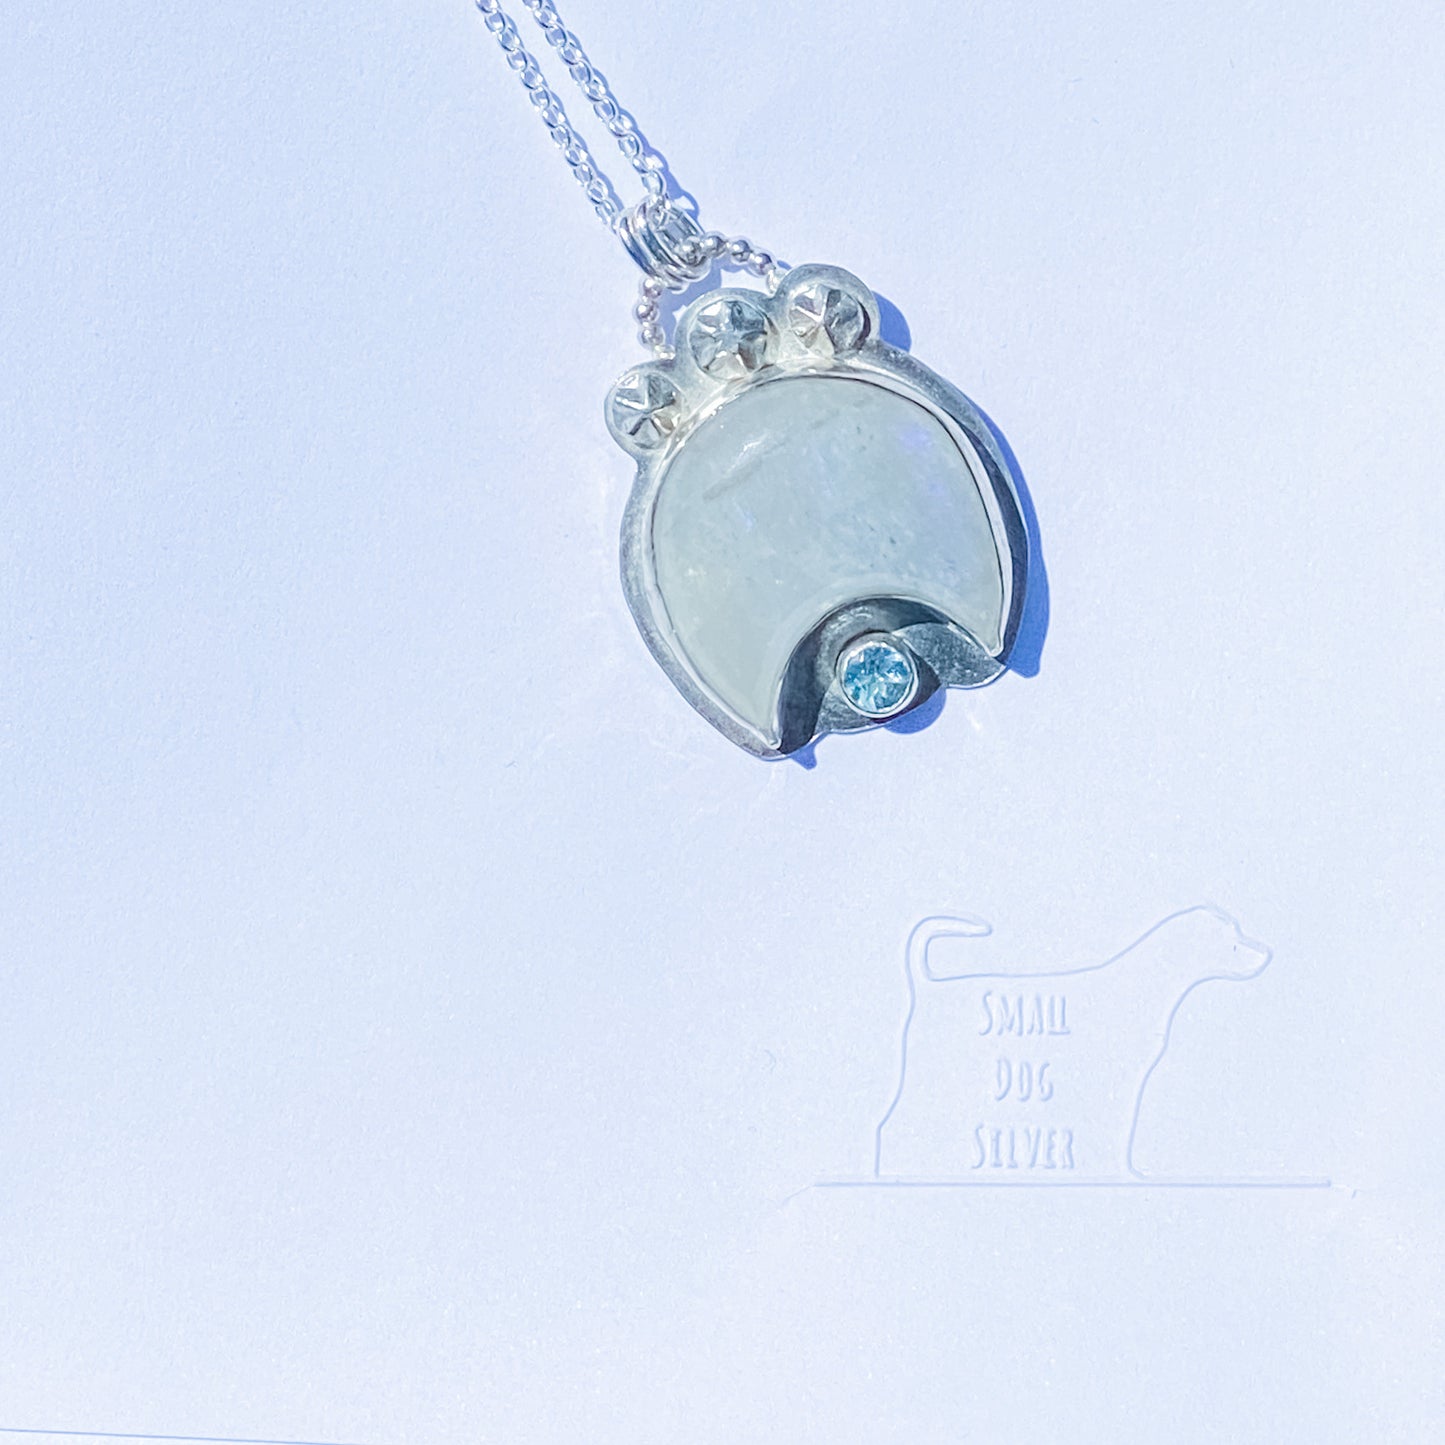 Stay Wild Necklace, Necklace, Small Dog Silver